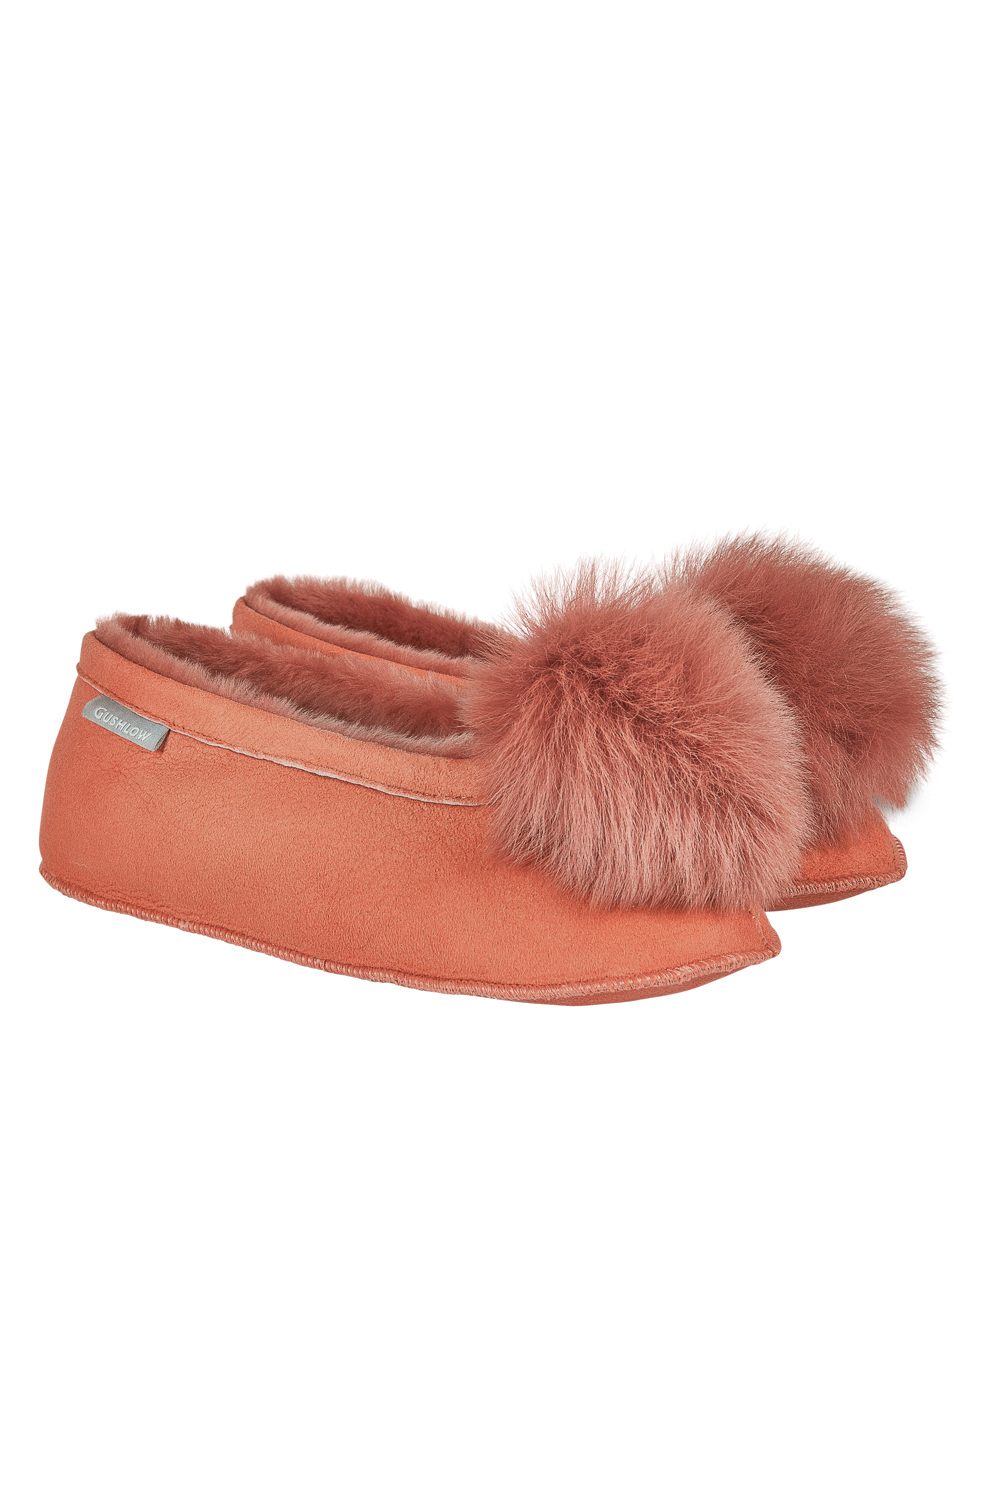 Margot Coral Shearling Slippers | Women | Gushlow & Cole - side double